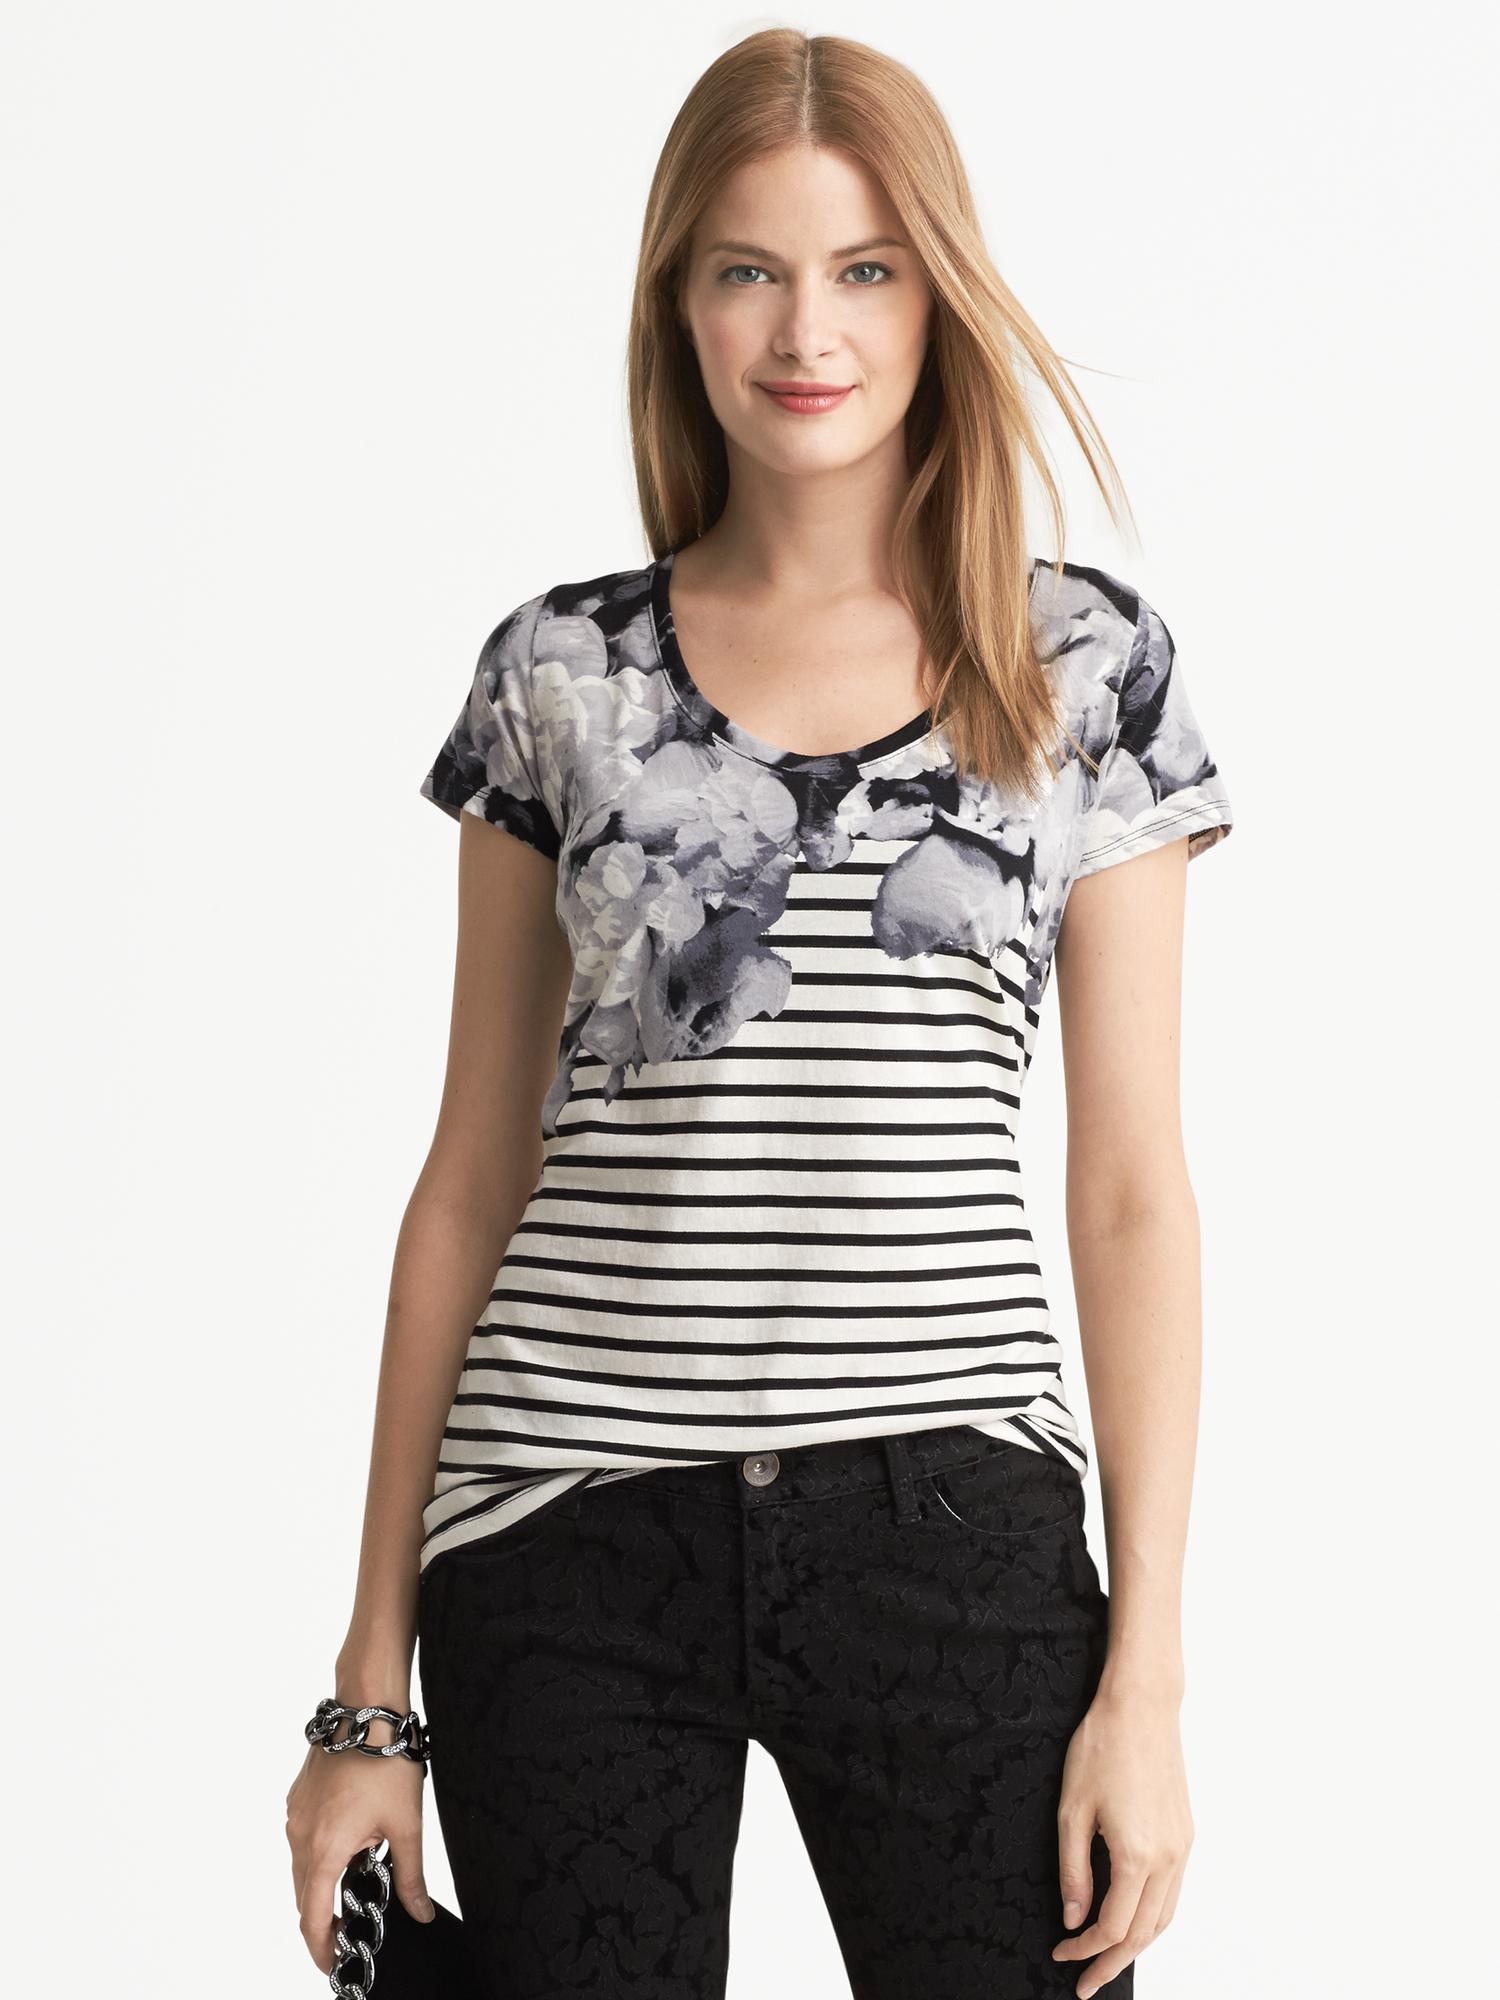 L'Wren Scott Collection Stripes and Peony Print Tee